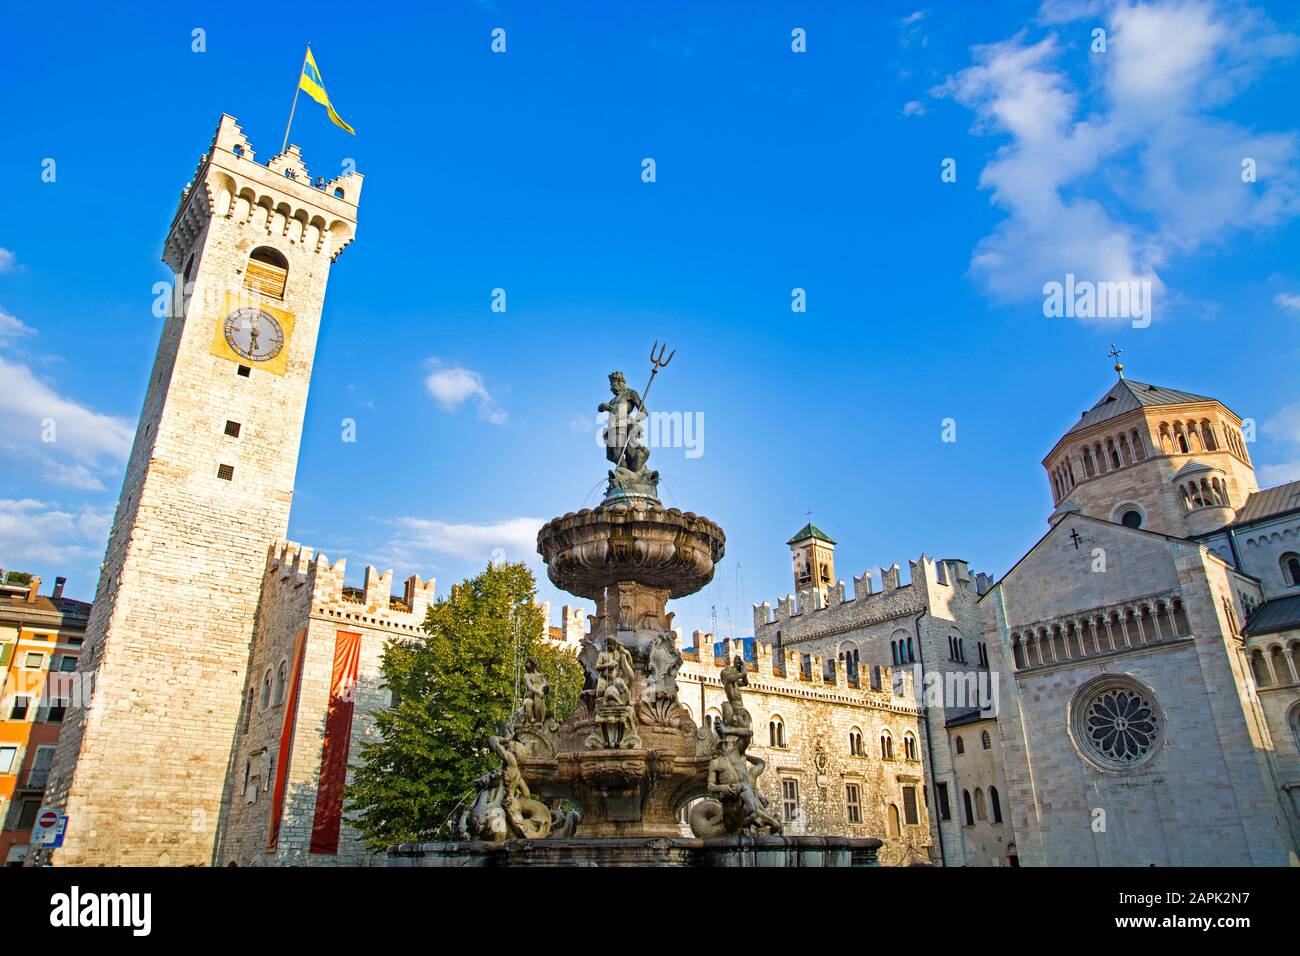 Main square in Trento, Trentino, Italy, Piazza Duomo, with clock tower and the Late Baroque Fountain of Neptune Stock Photo